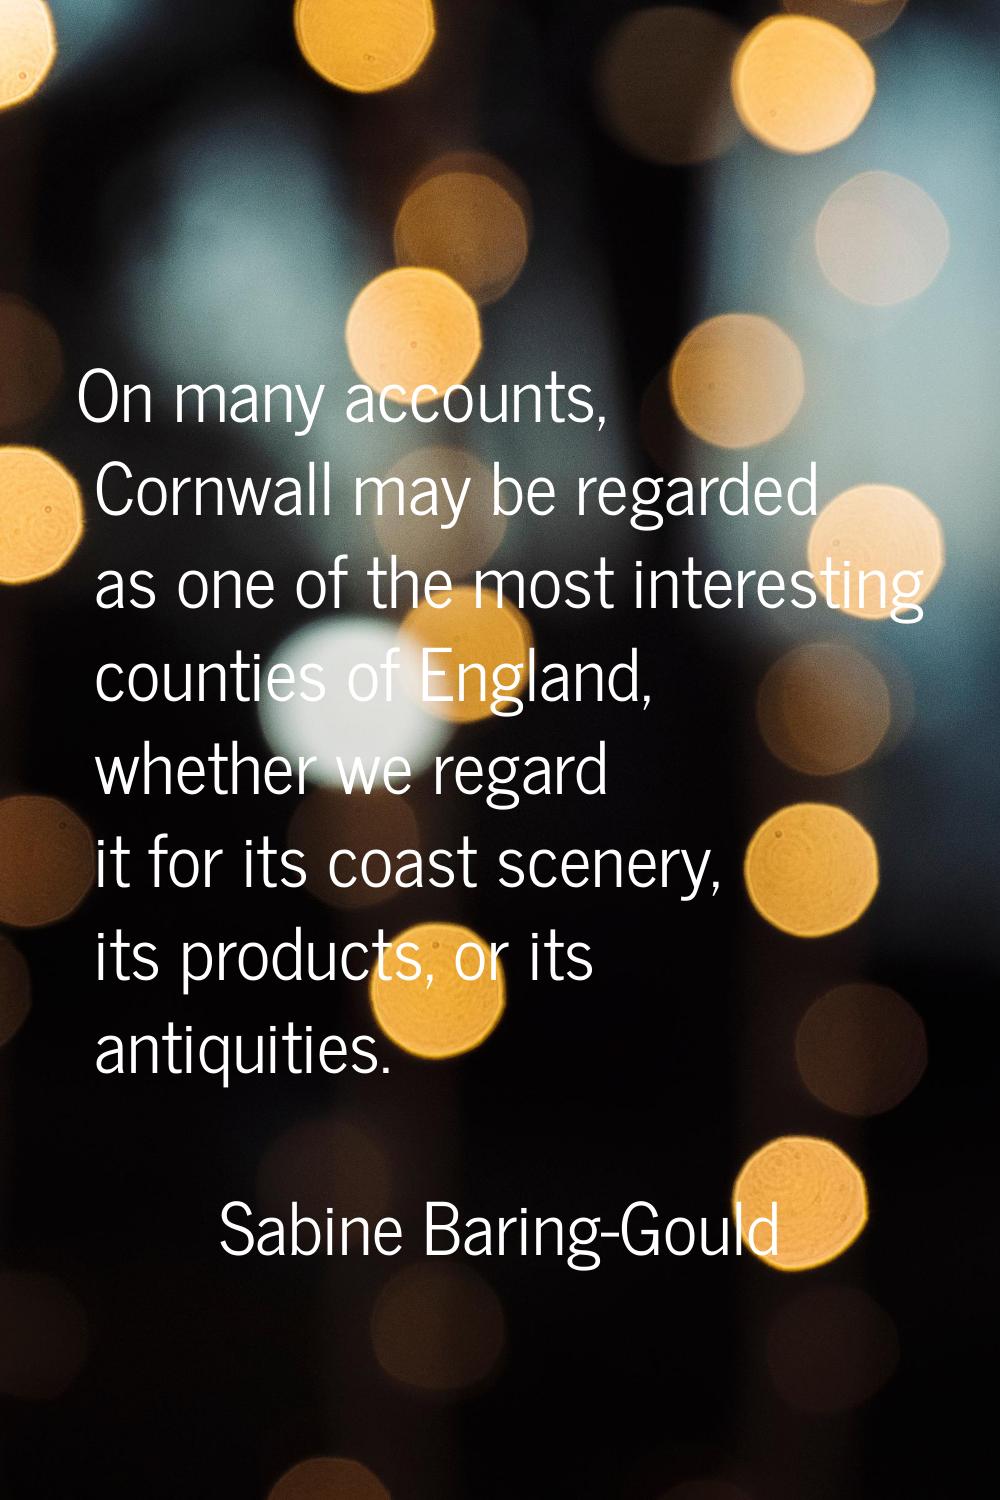 On many accounts, Cornwall may be regarded as one of the most interesting counties of England, whet